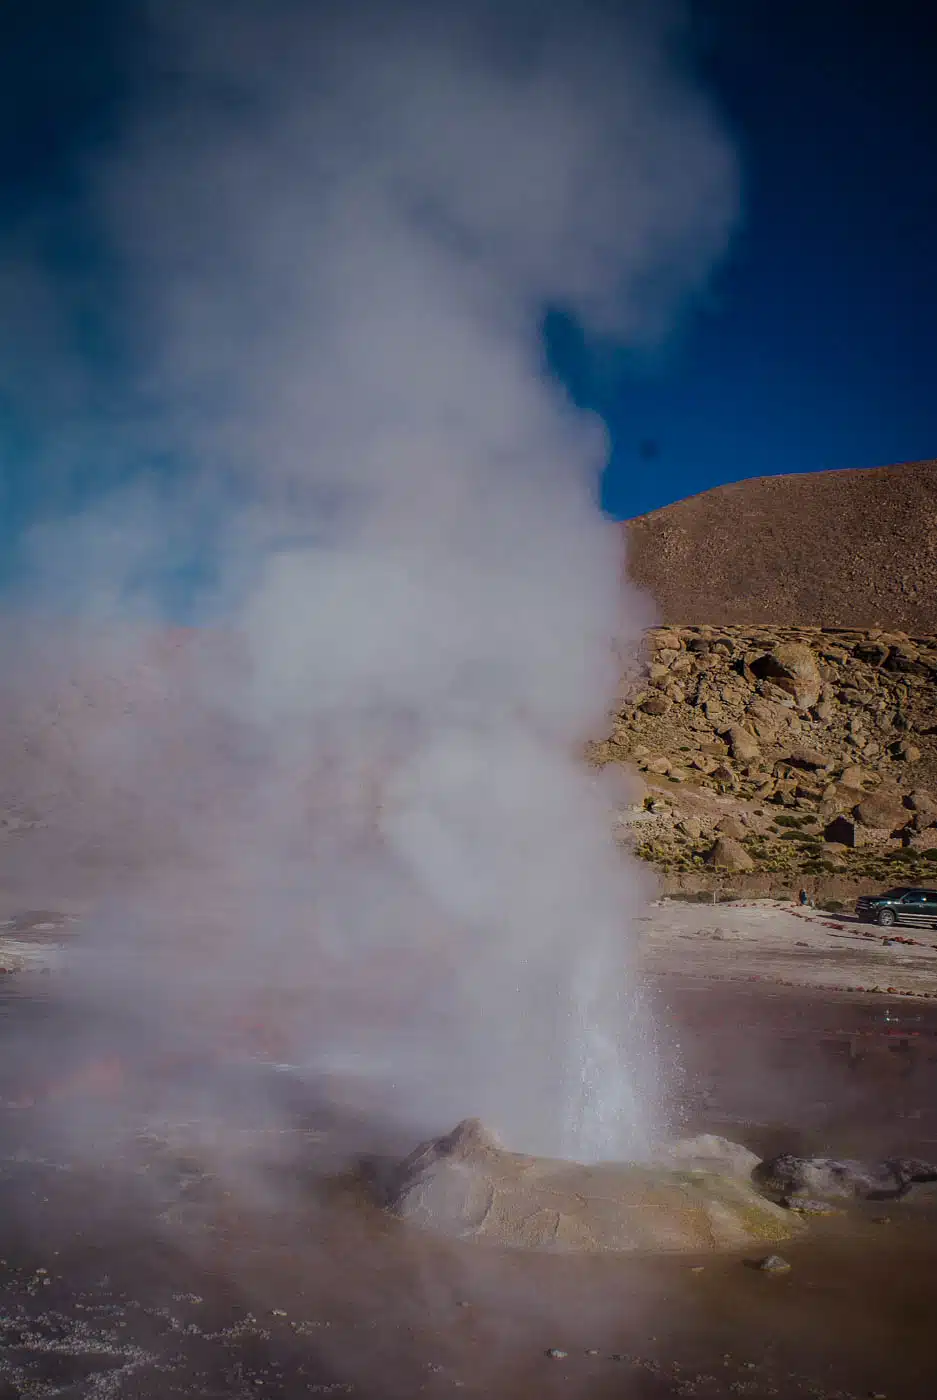 El Tatio Geysers South America Travel Bucket List. 90 Awesome Things to do in South America When Backpacking and Travelling #southamerica #bucketlist #traveldestinations